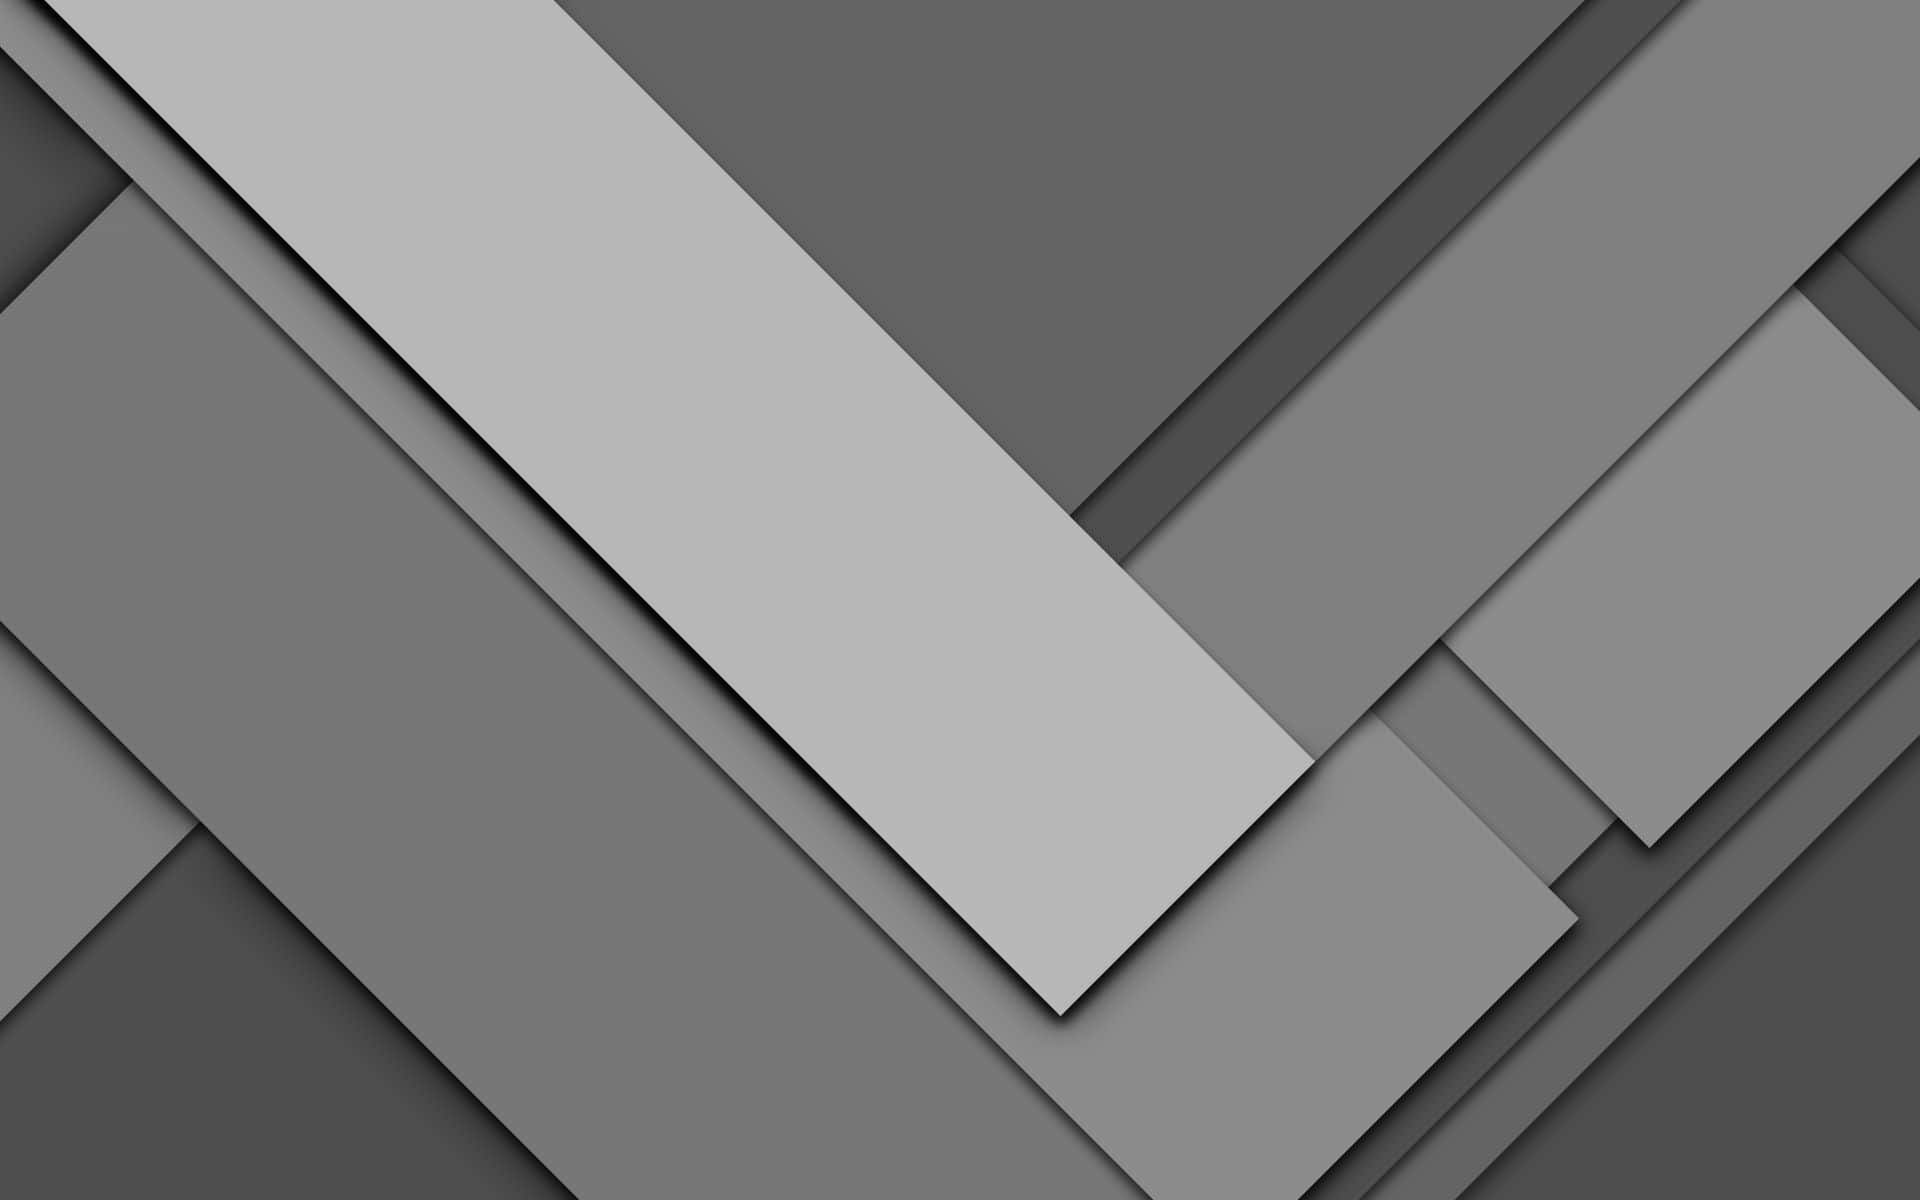 A Gray And White Abstract Background With A Black And White Chevron